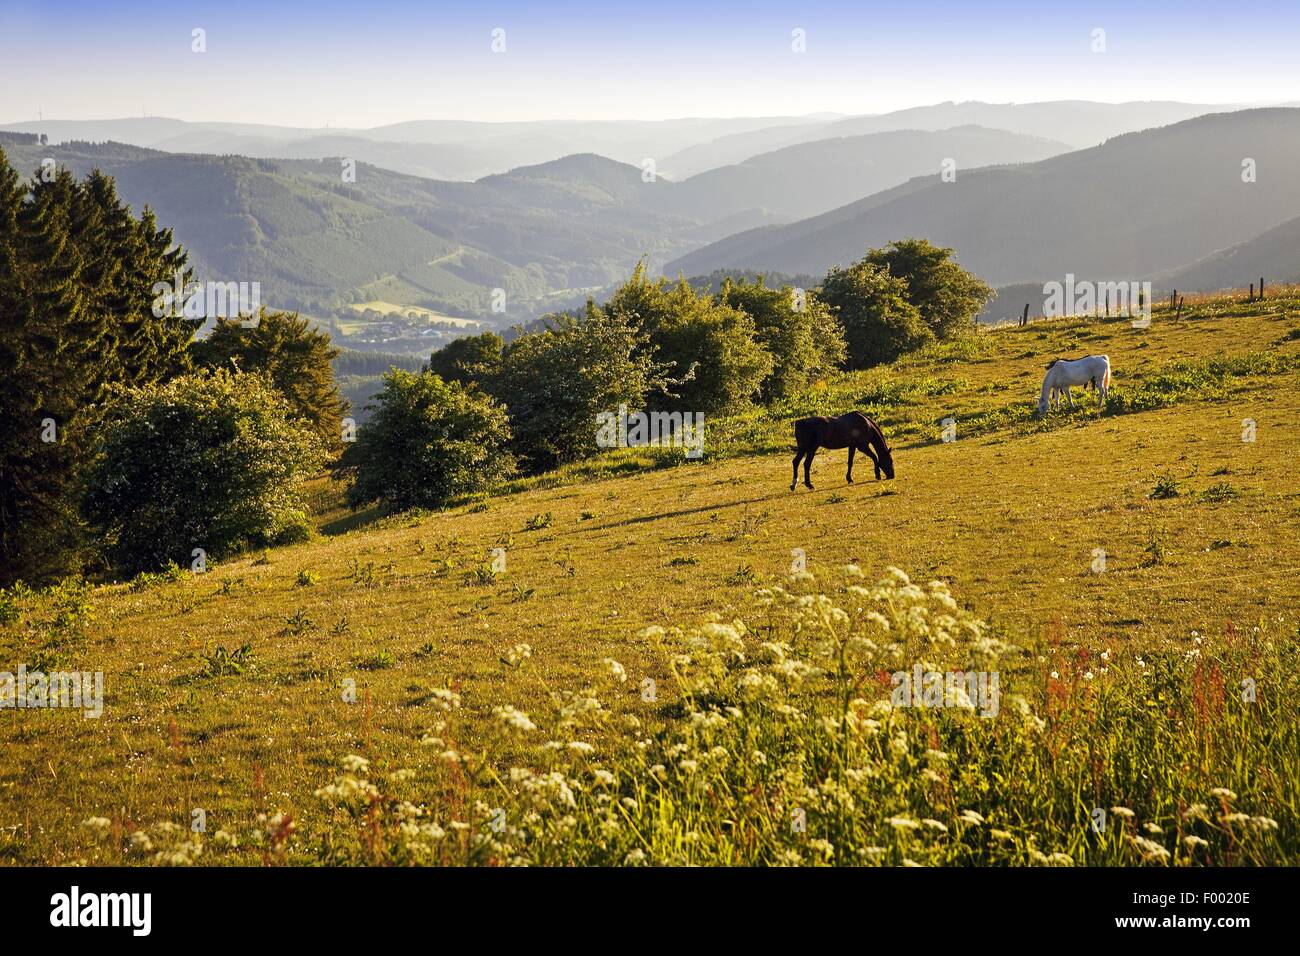 domestic horse (Equus przewalskii f. caballus), lookout over the landscape with two grazing horses near Wildewiese, Germany, North Rhine-Westphalia, Sauerland, Sundern Stock Photo